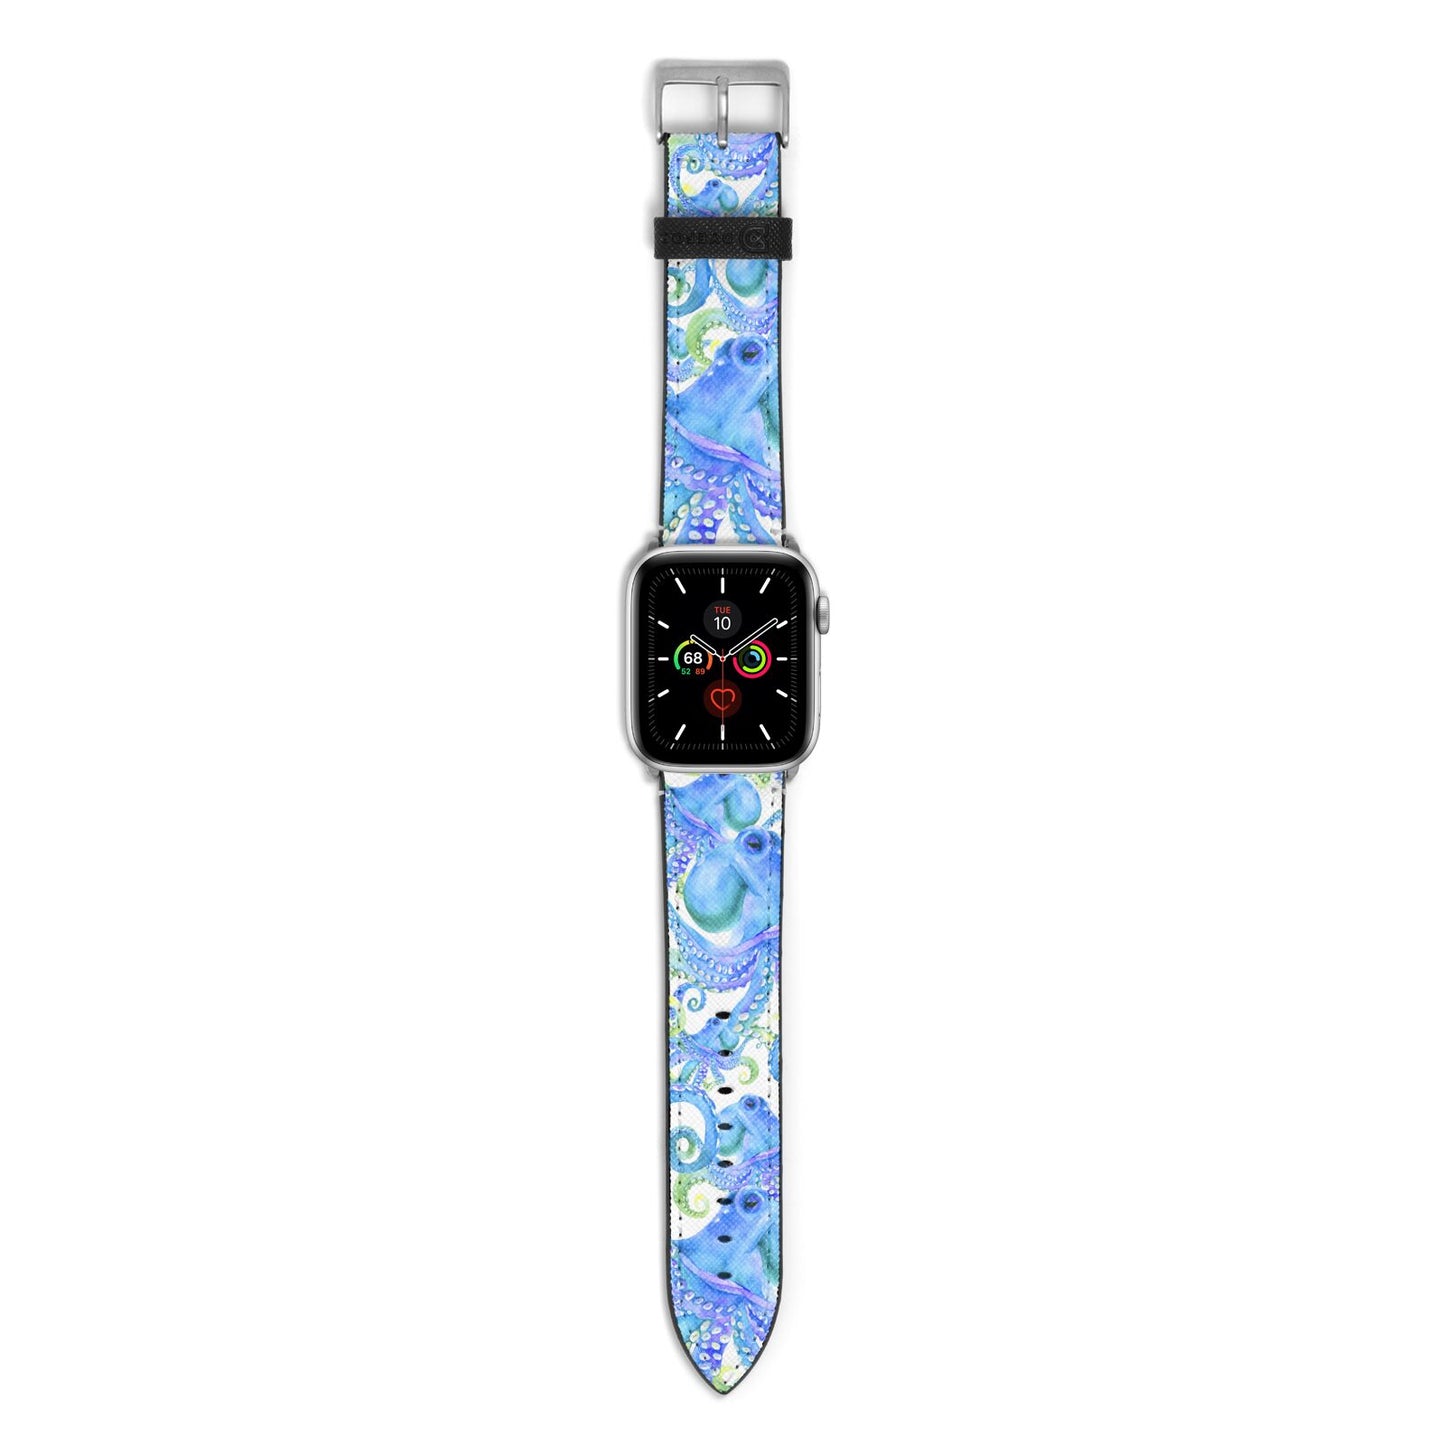 Octopus Apple Watch Strap with Silver Hardware